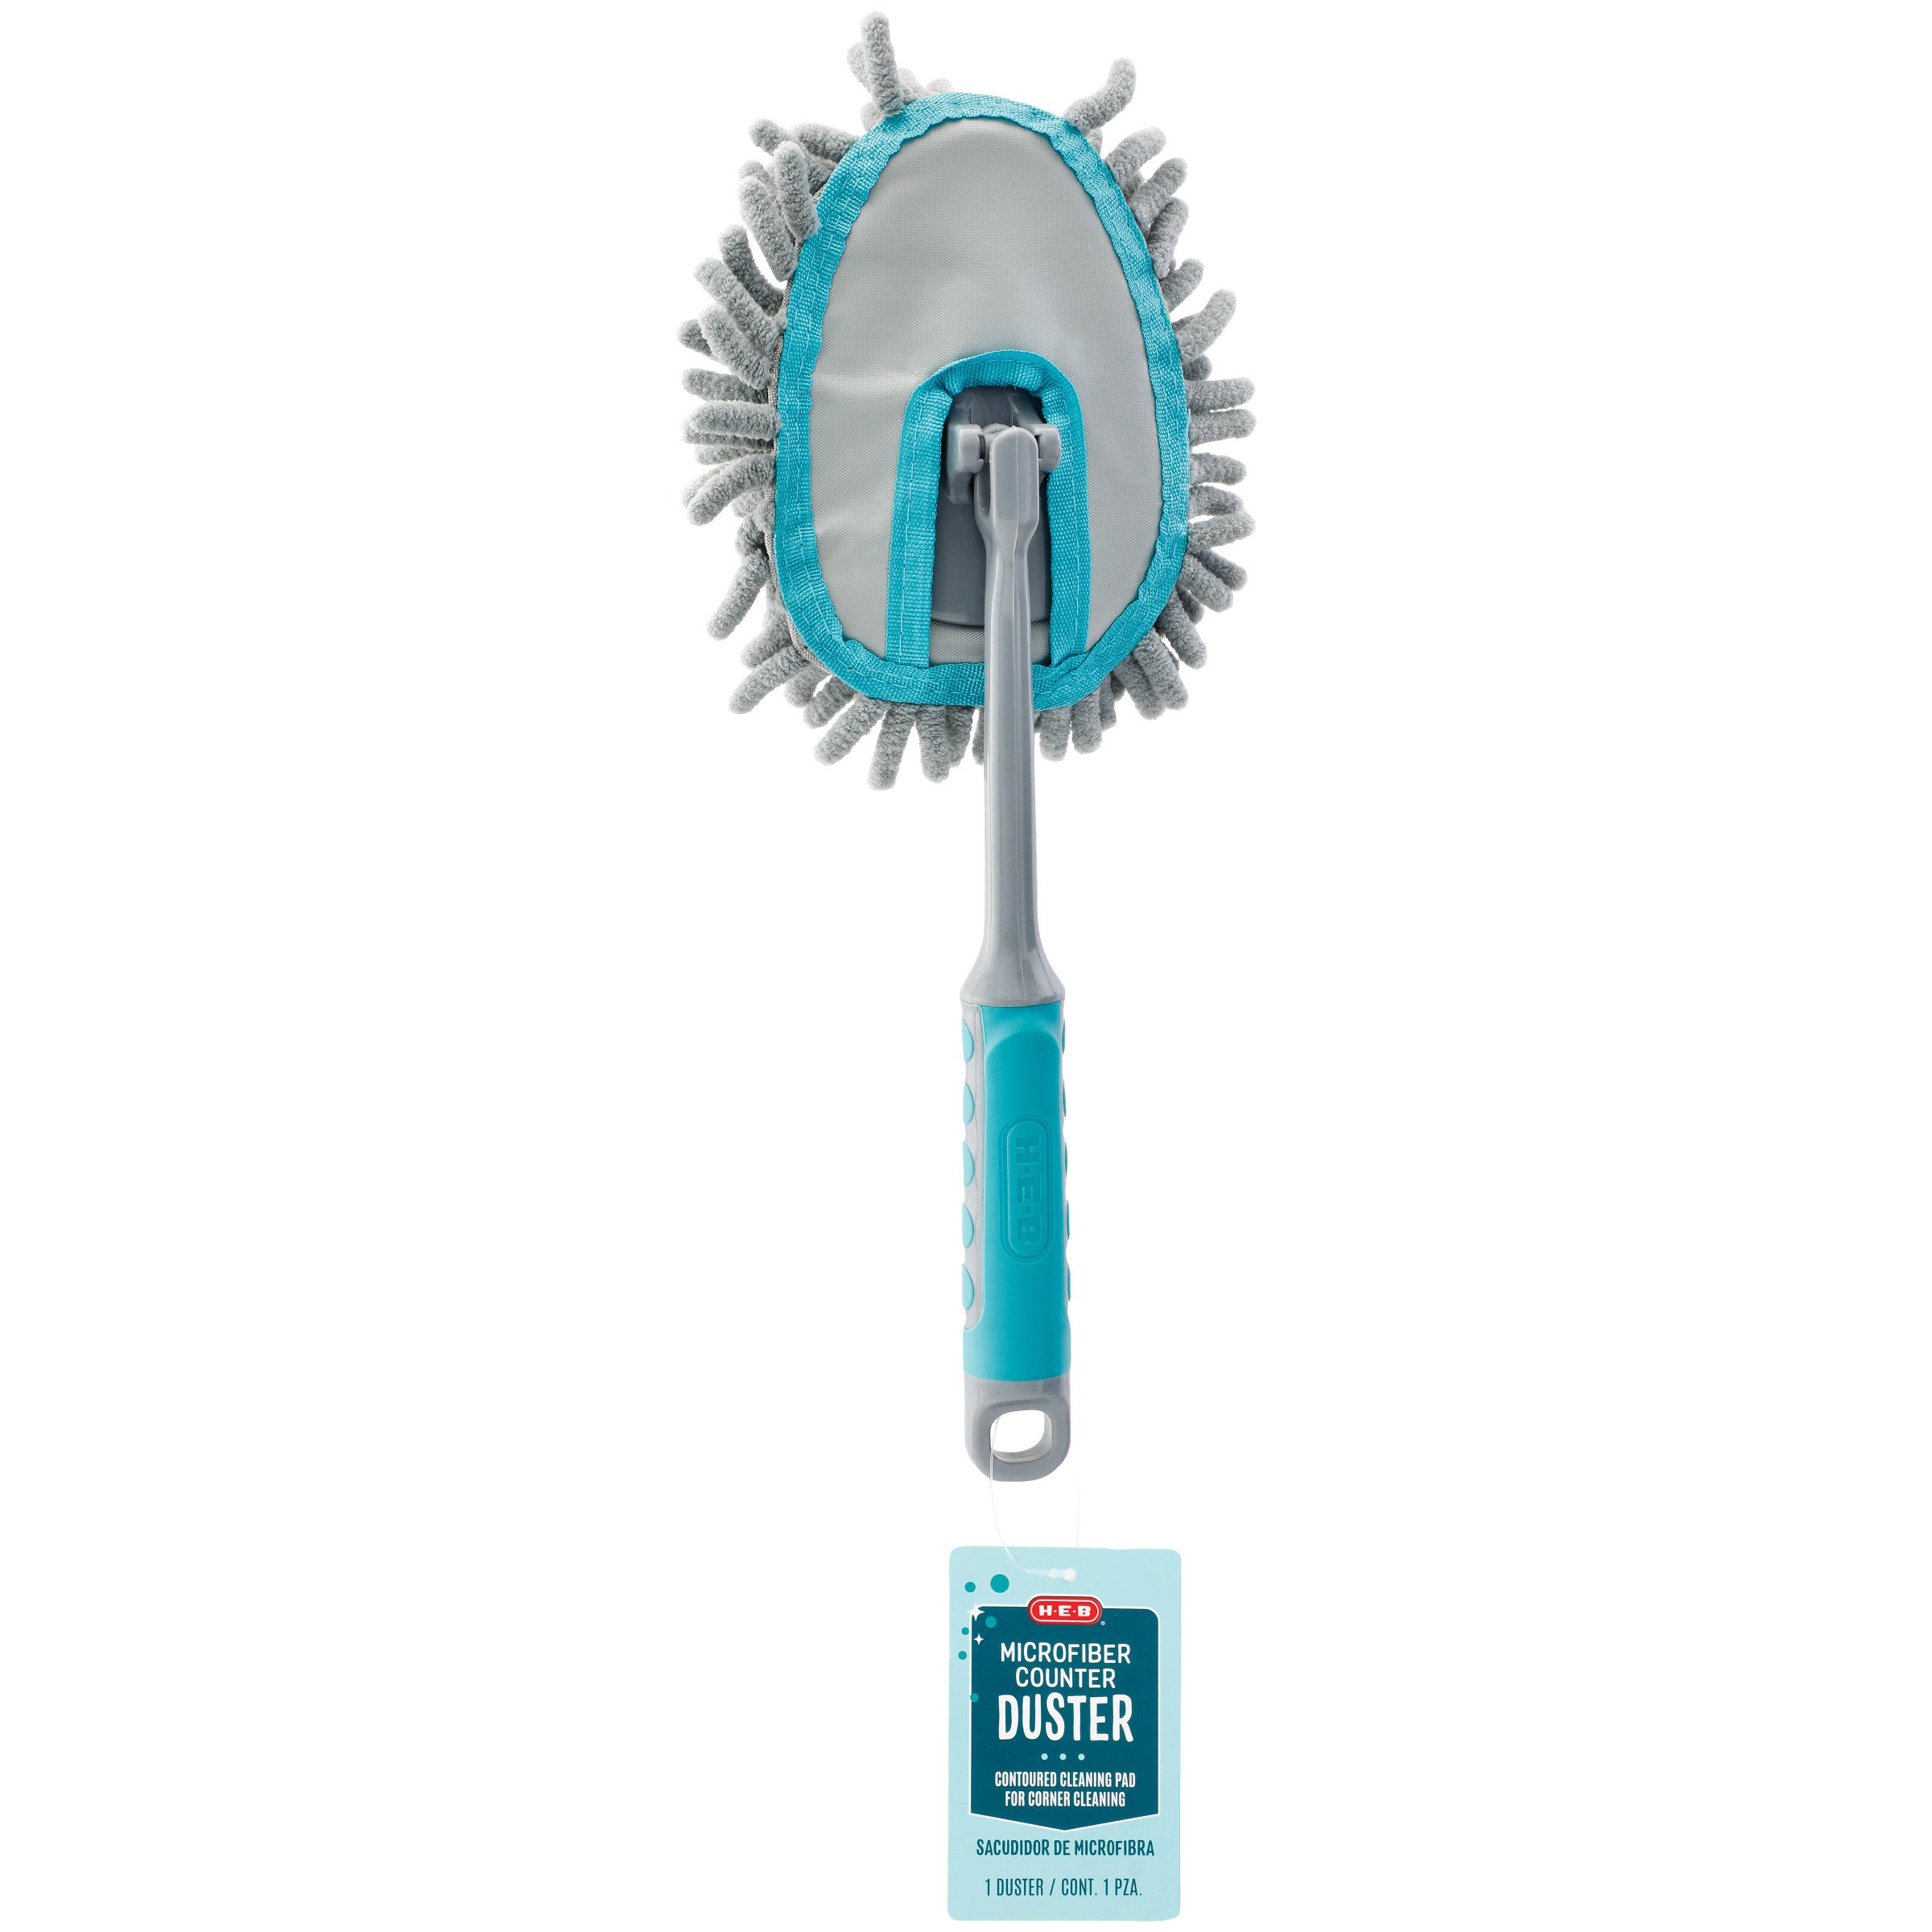 H-E-B Microfiber Counter Duster - Shop Cleaning Cloths & Dusters at H-E-B